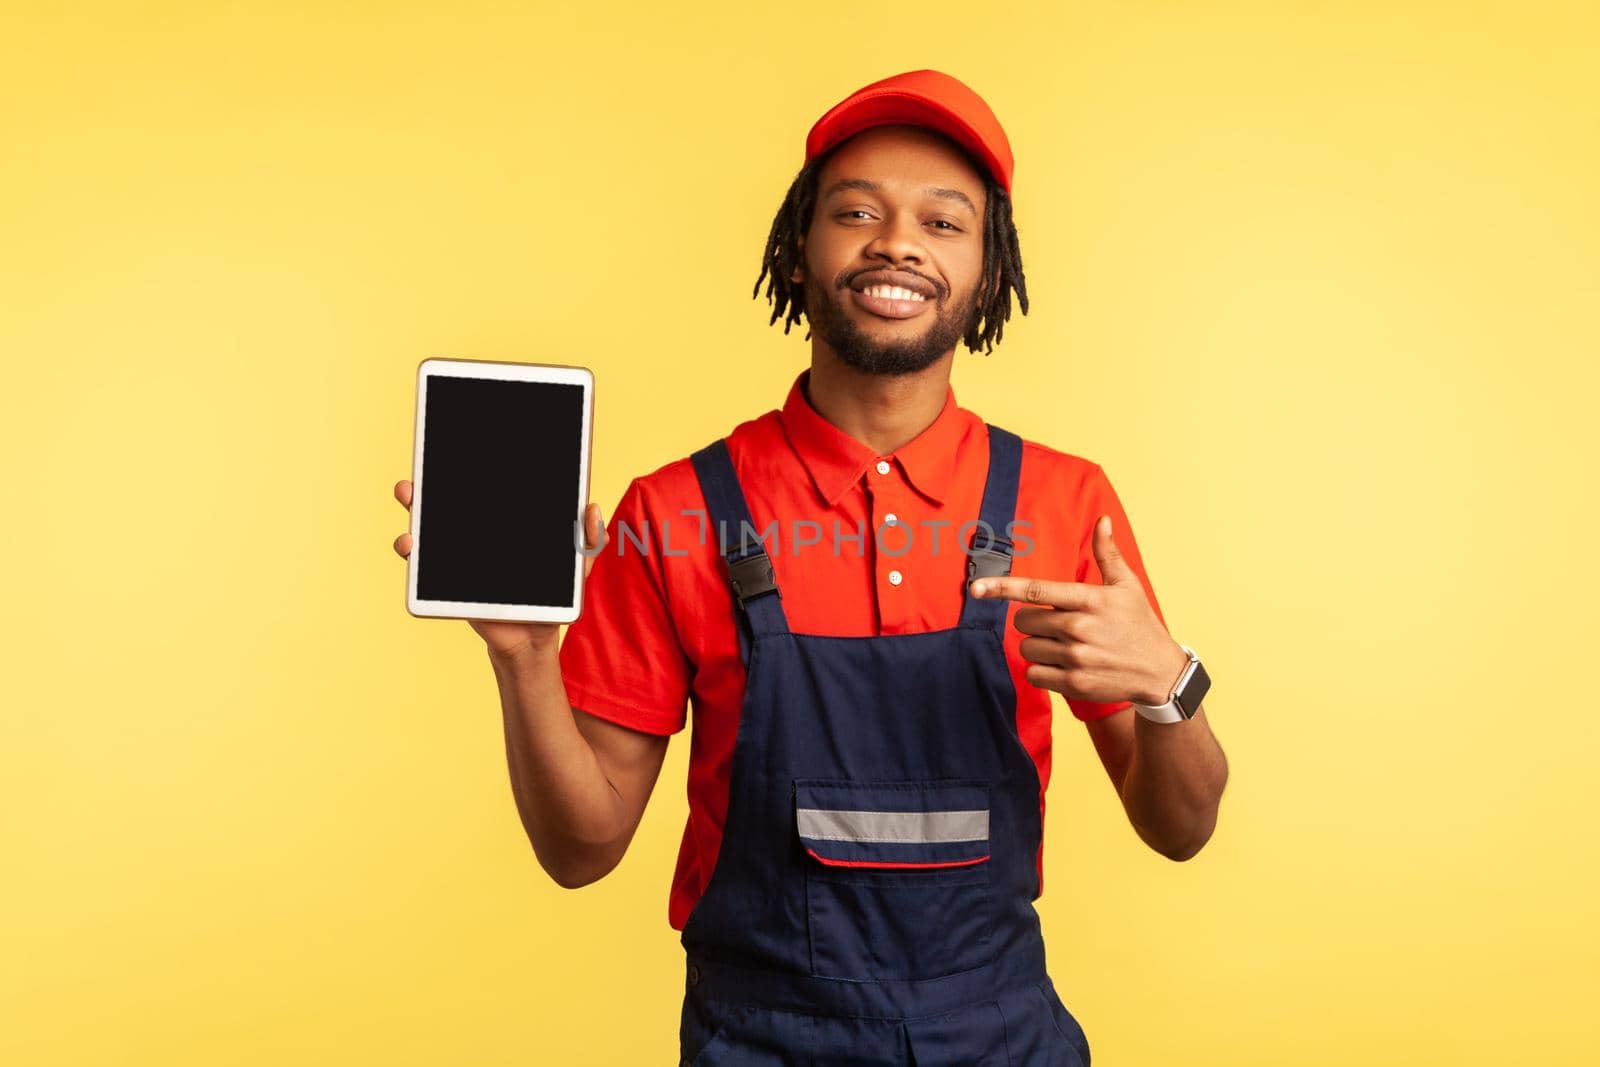 Handyman wearing overalls holding tablet with empty screen for advertisement industry service. by Khosro1